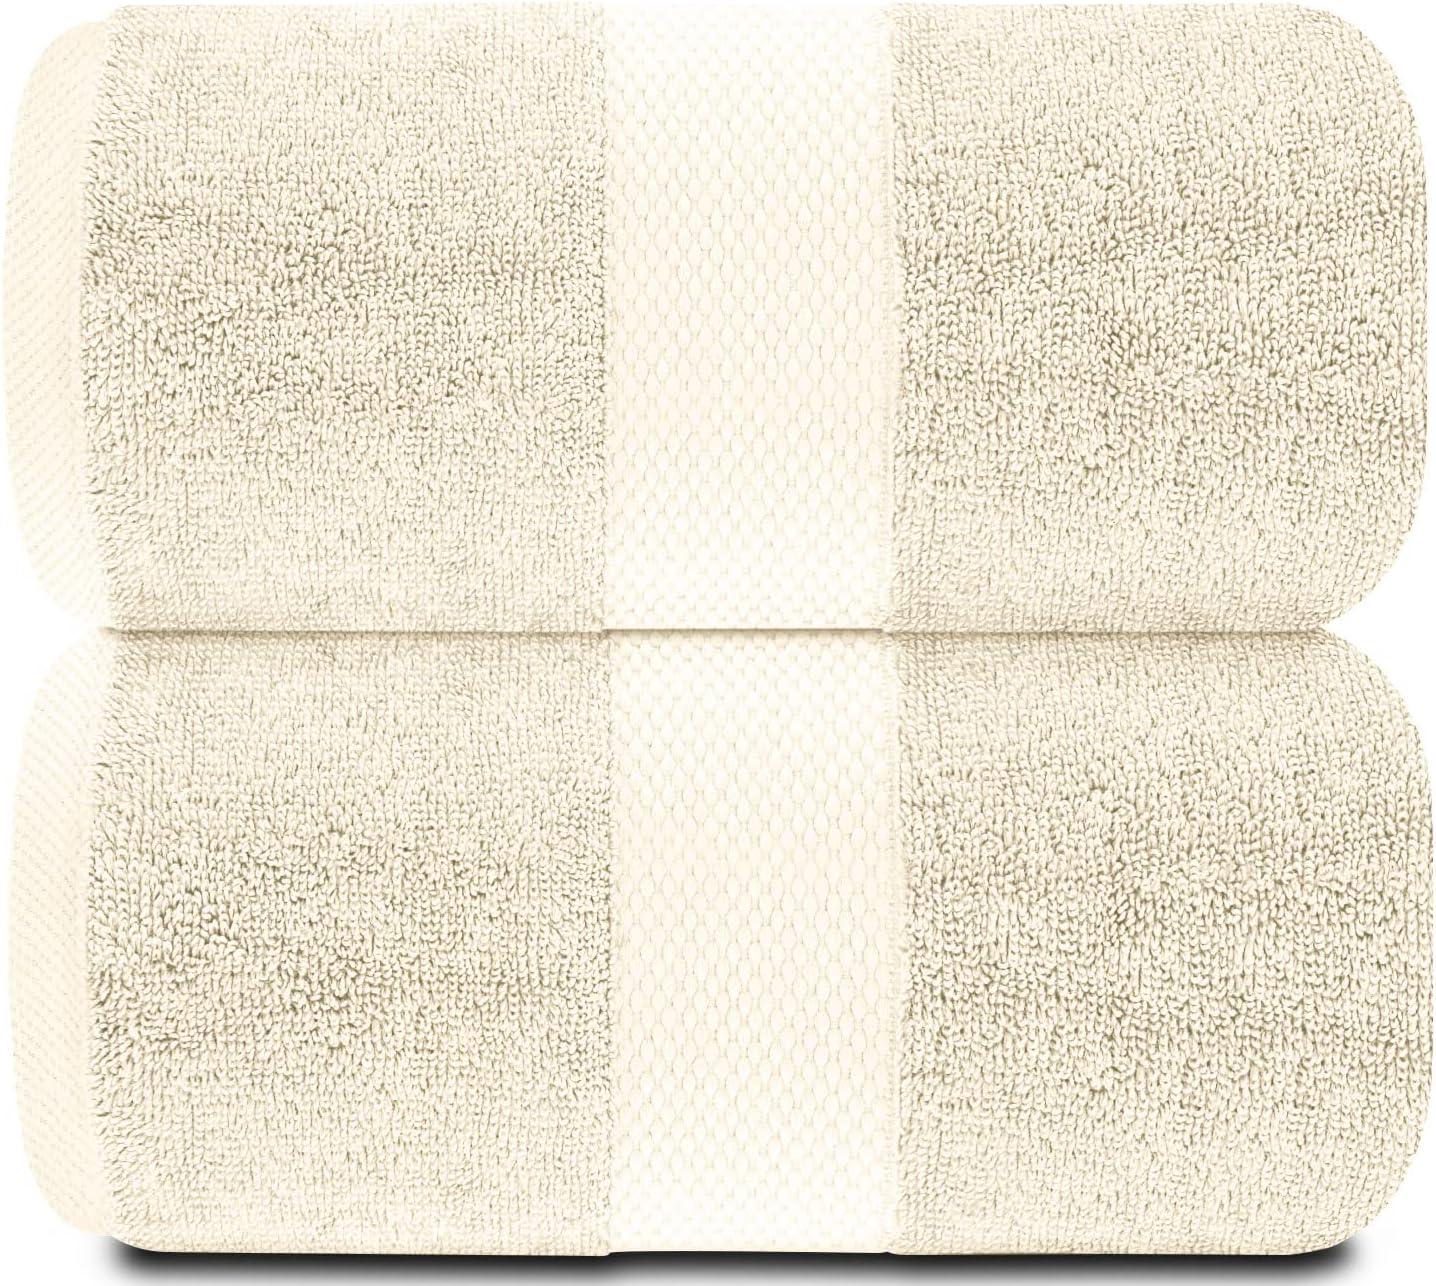 White Classic Luxury Bath Sheet Towels Extra Large | Highly Absorbent Hotel spa Collection Bathroom Towel | 35x70 Inch | 2 Pack (Forest Green)